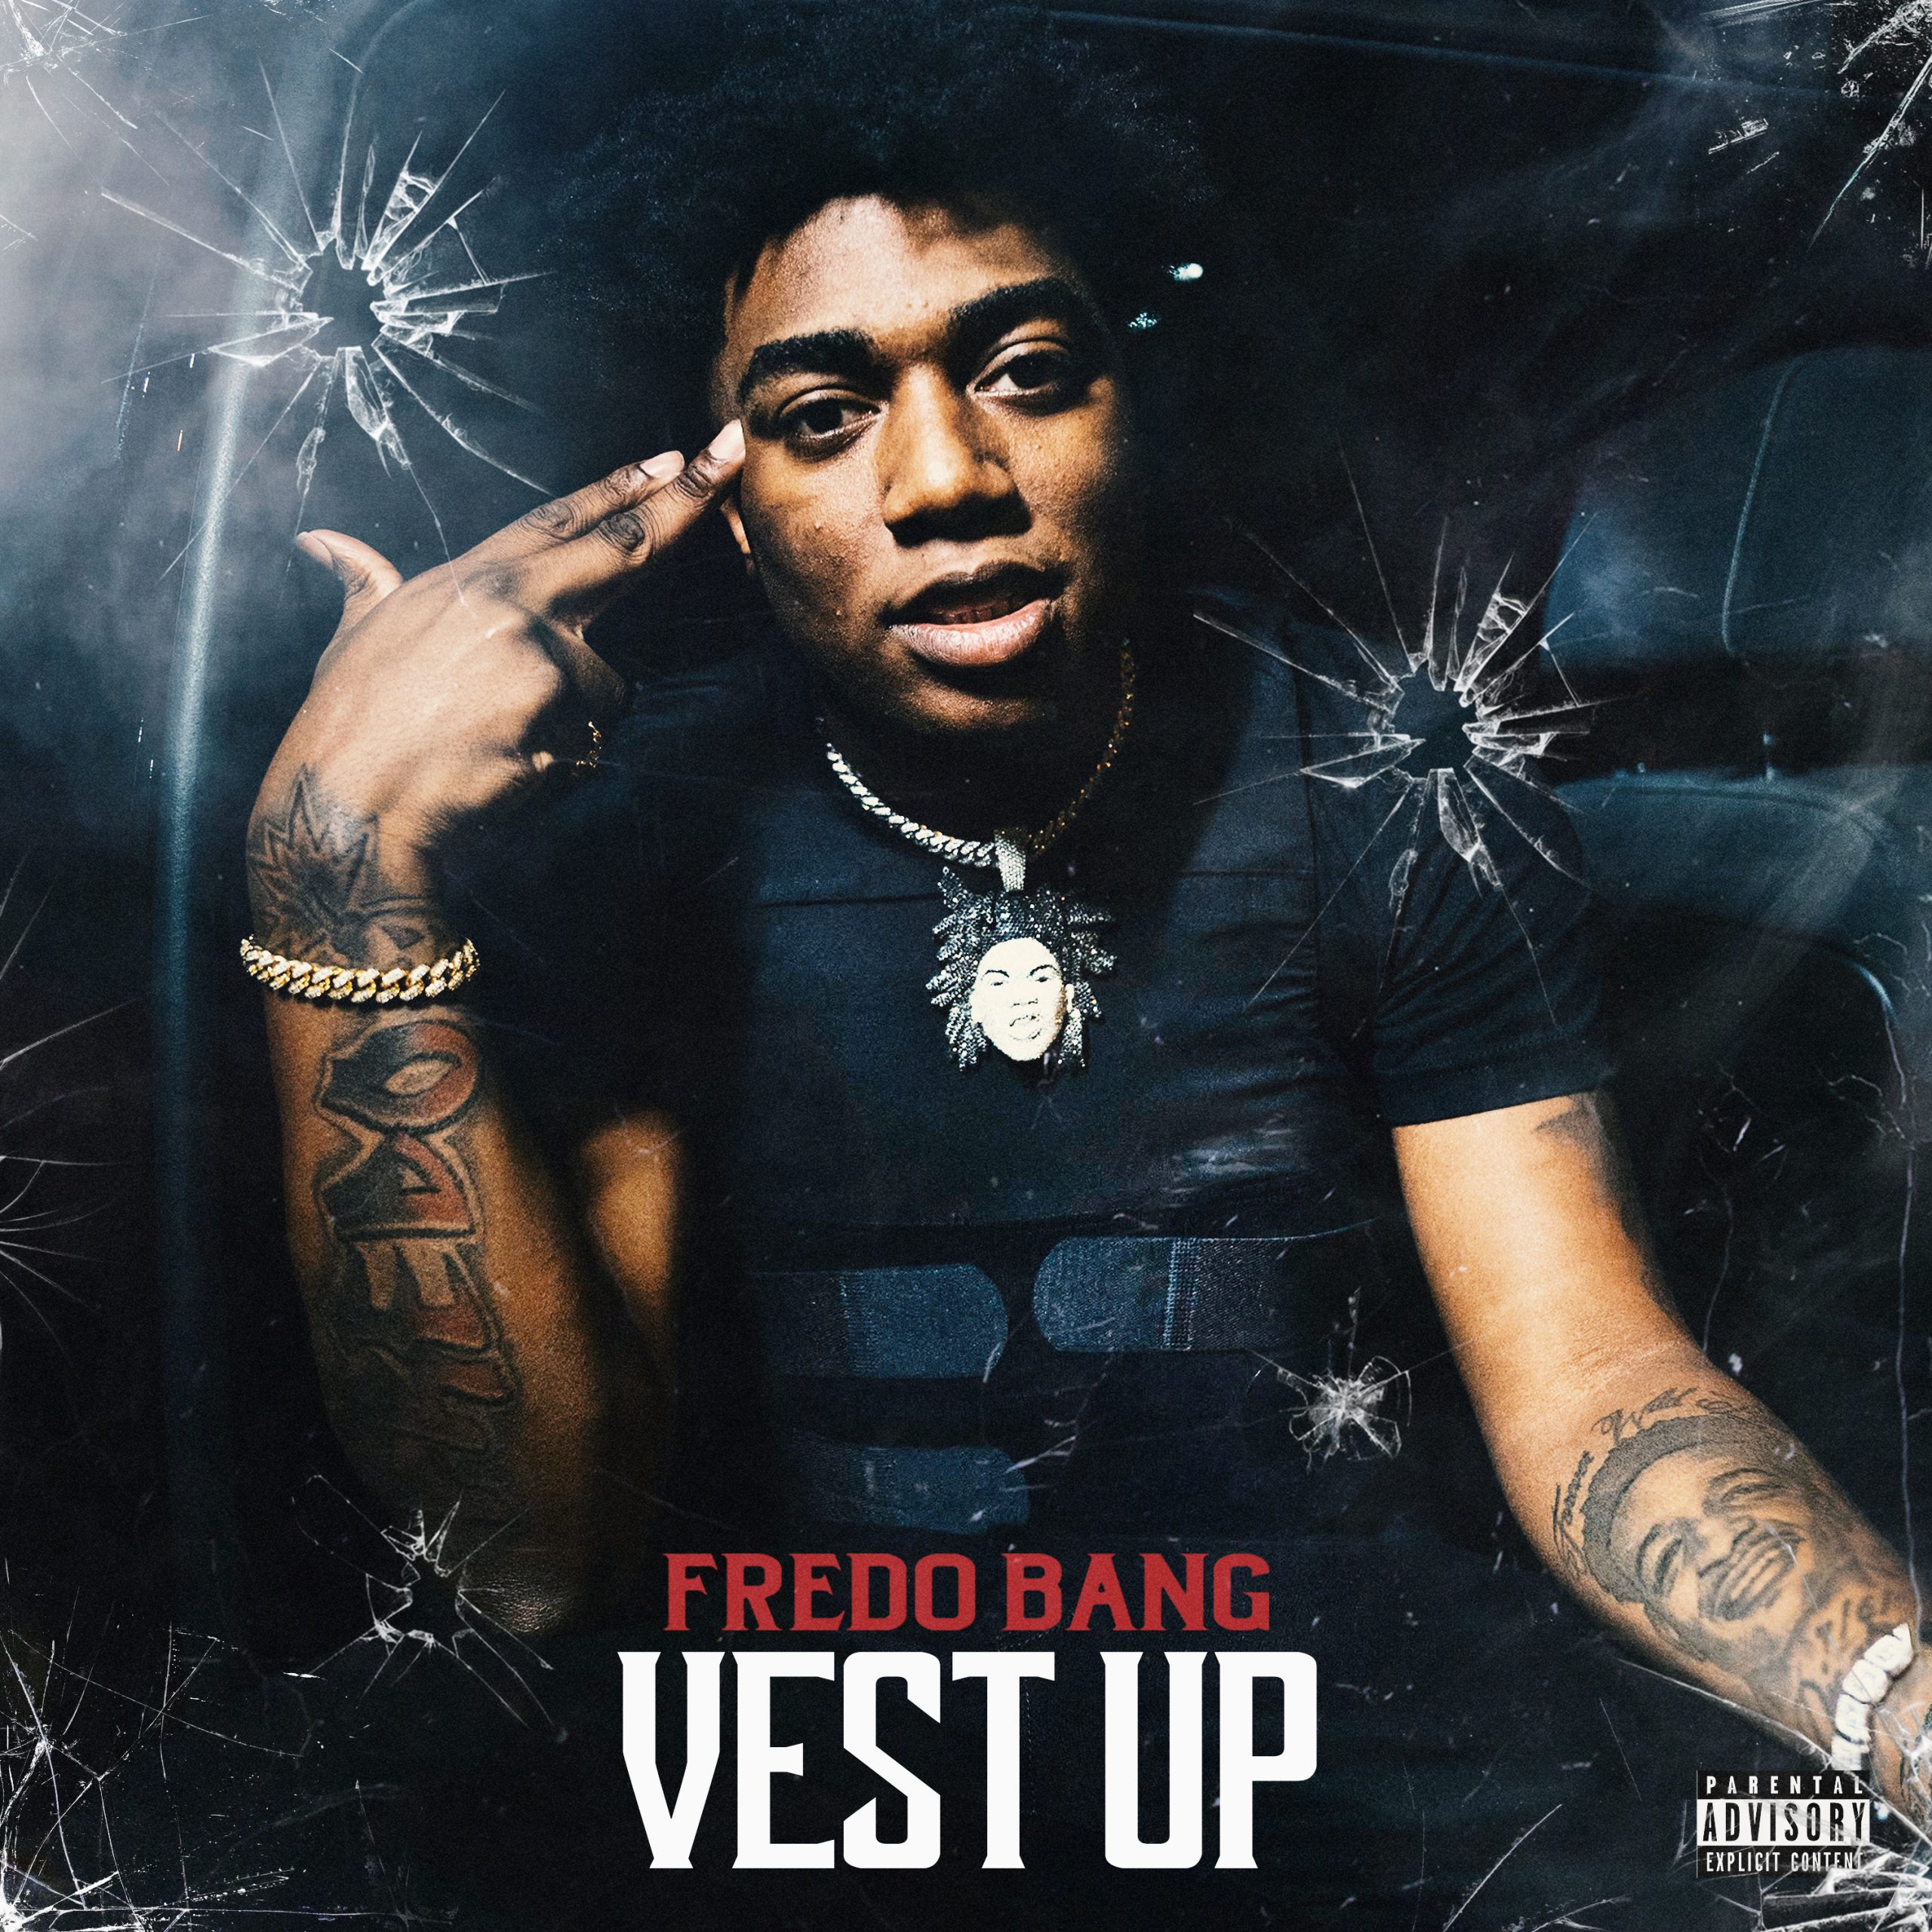 Fredo Bang Announces Tour With Moneybagg Yo Releases Vest Up Single Audible Treats